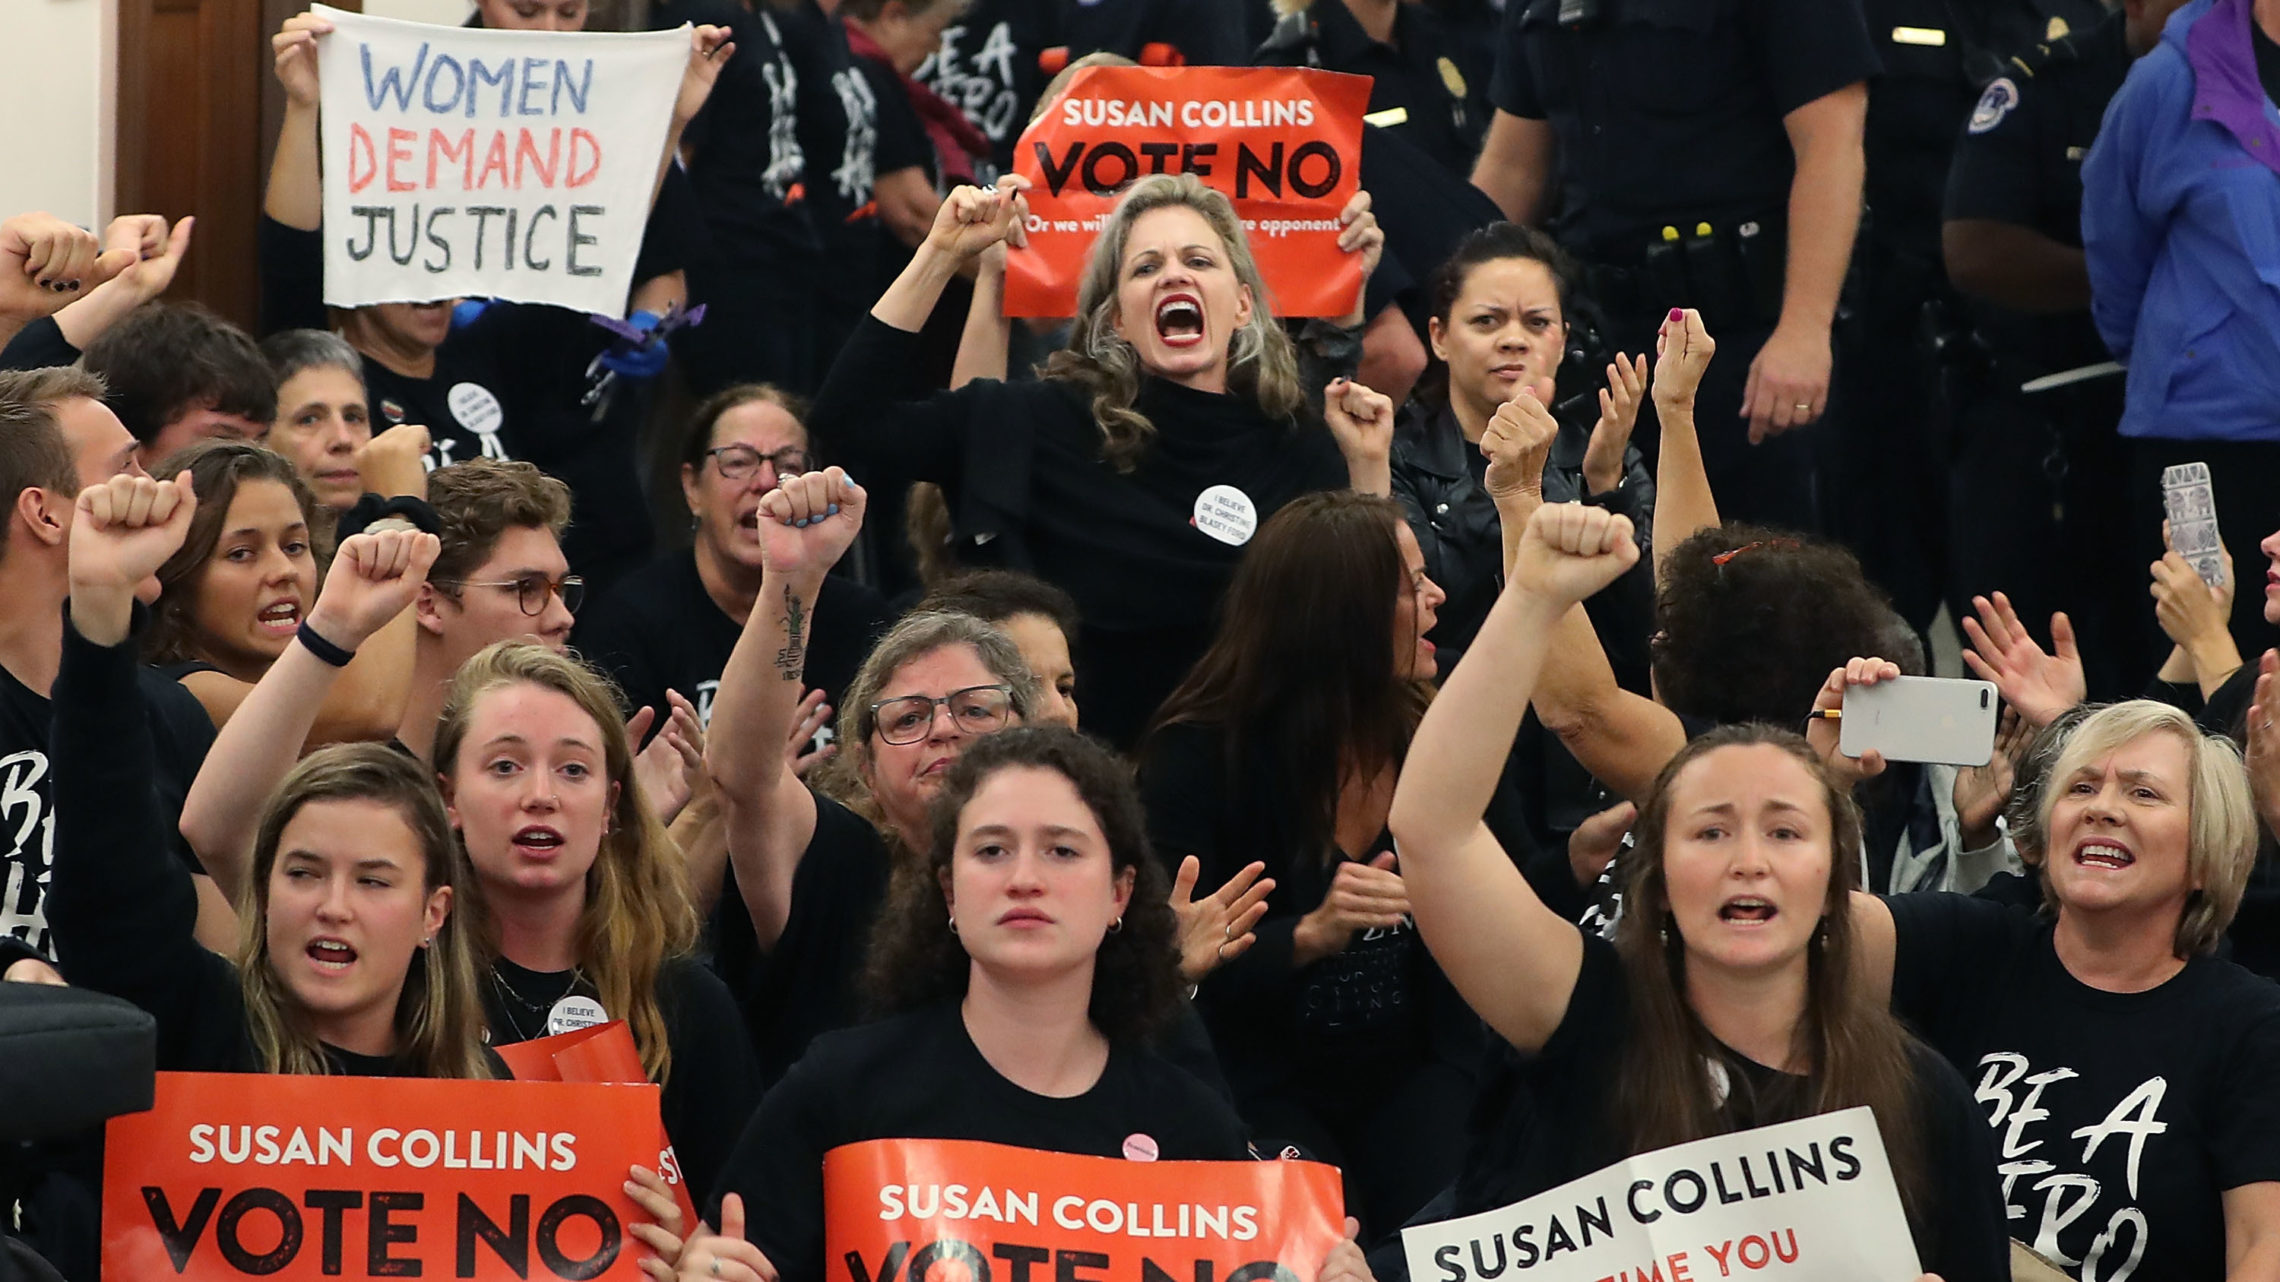 Demonstrators gather on Capitol Hill at the office of GOP Sen. Susan Collins of Maine to protest the nomination of Supreme Court nominee Judge Brett Kavanaugh. CREDIT: MARK WILSON/GETTY IMAGES